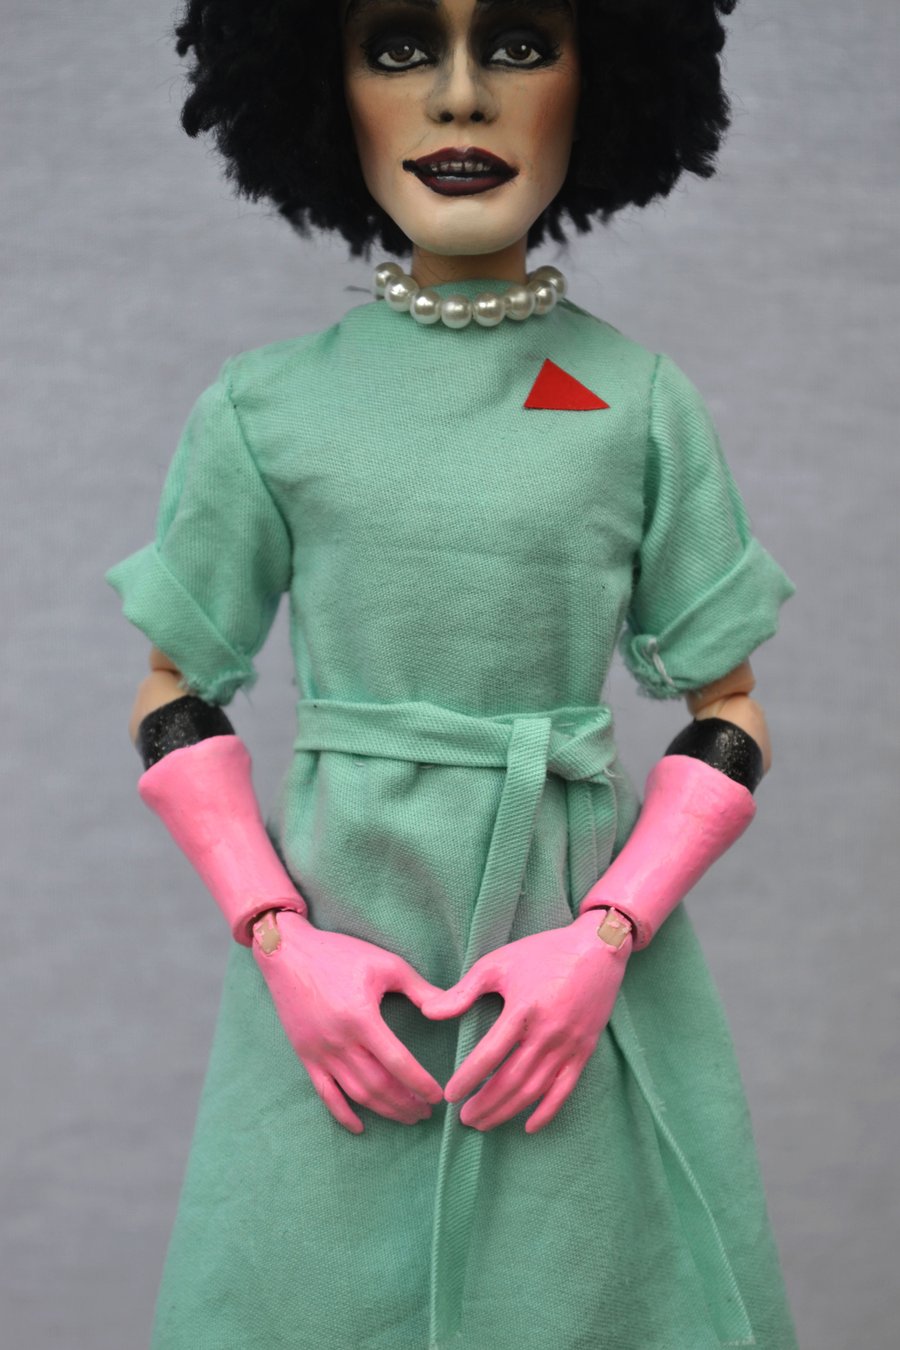 Frank N furter - art doll inspired by rocky horror picture show 